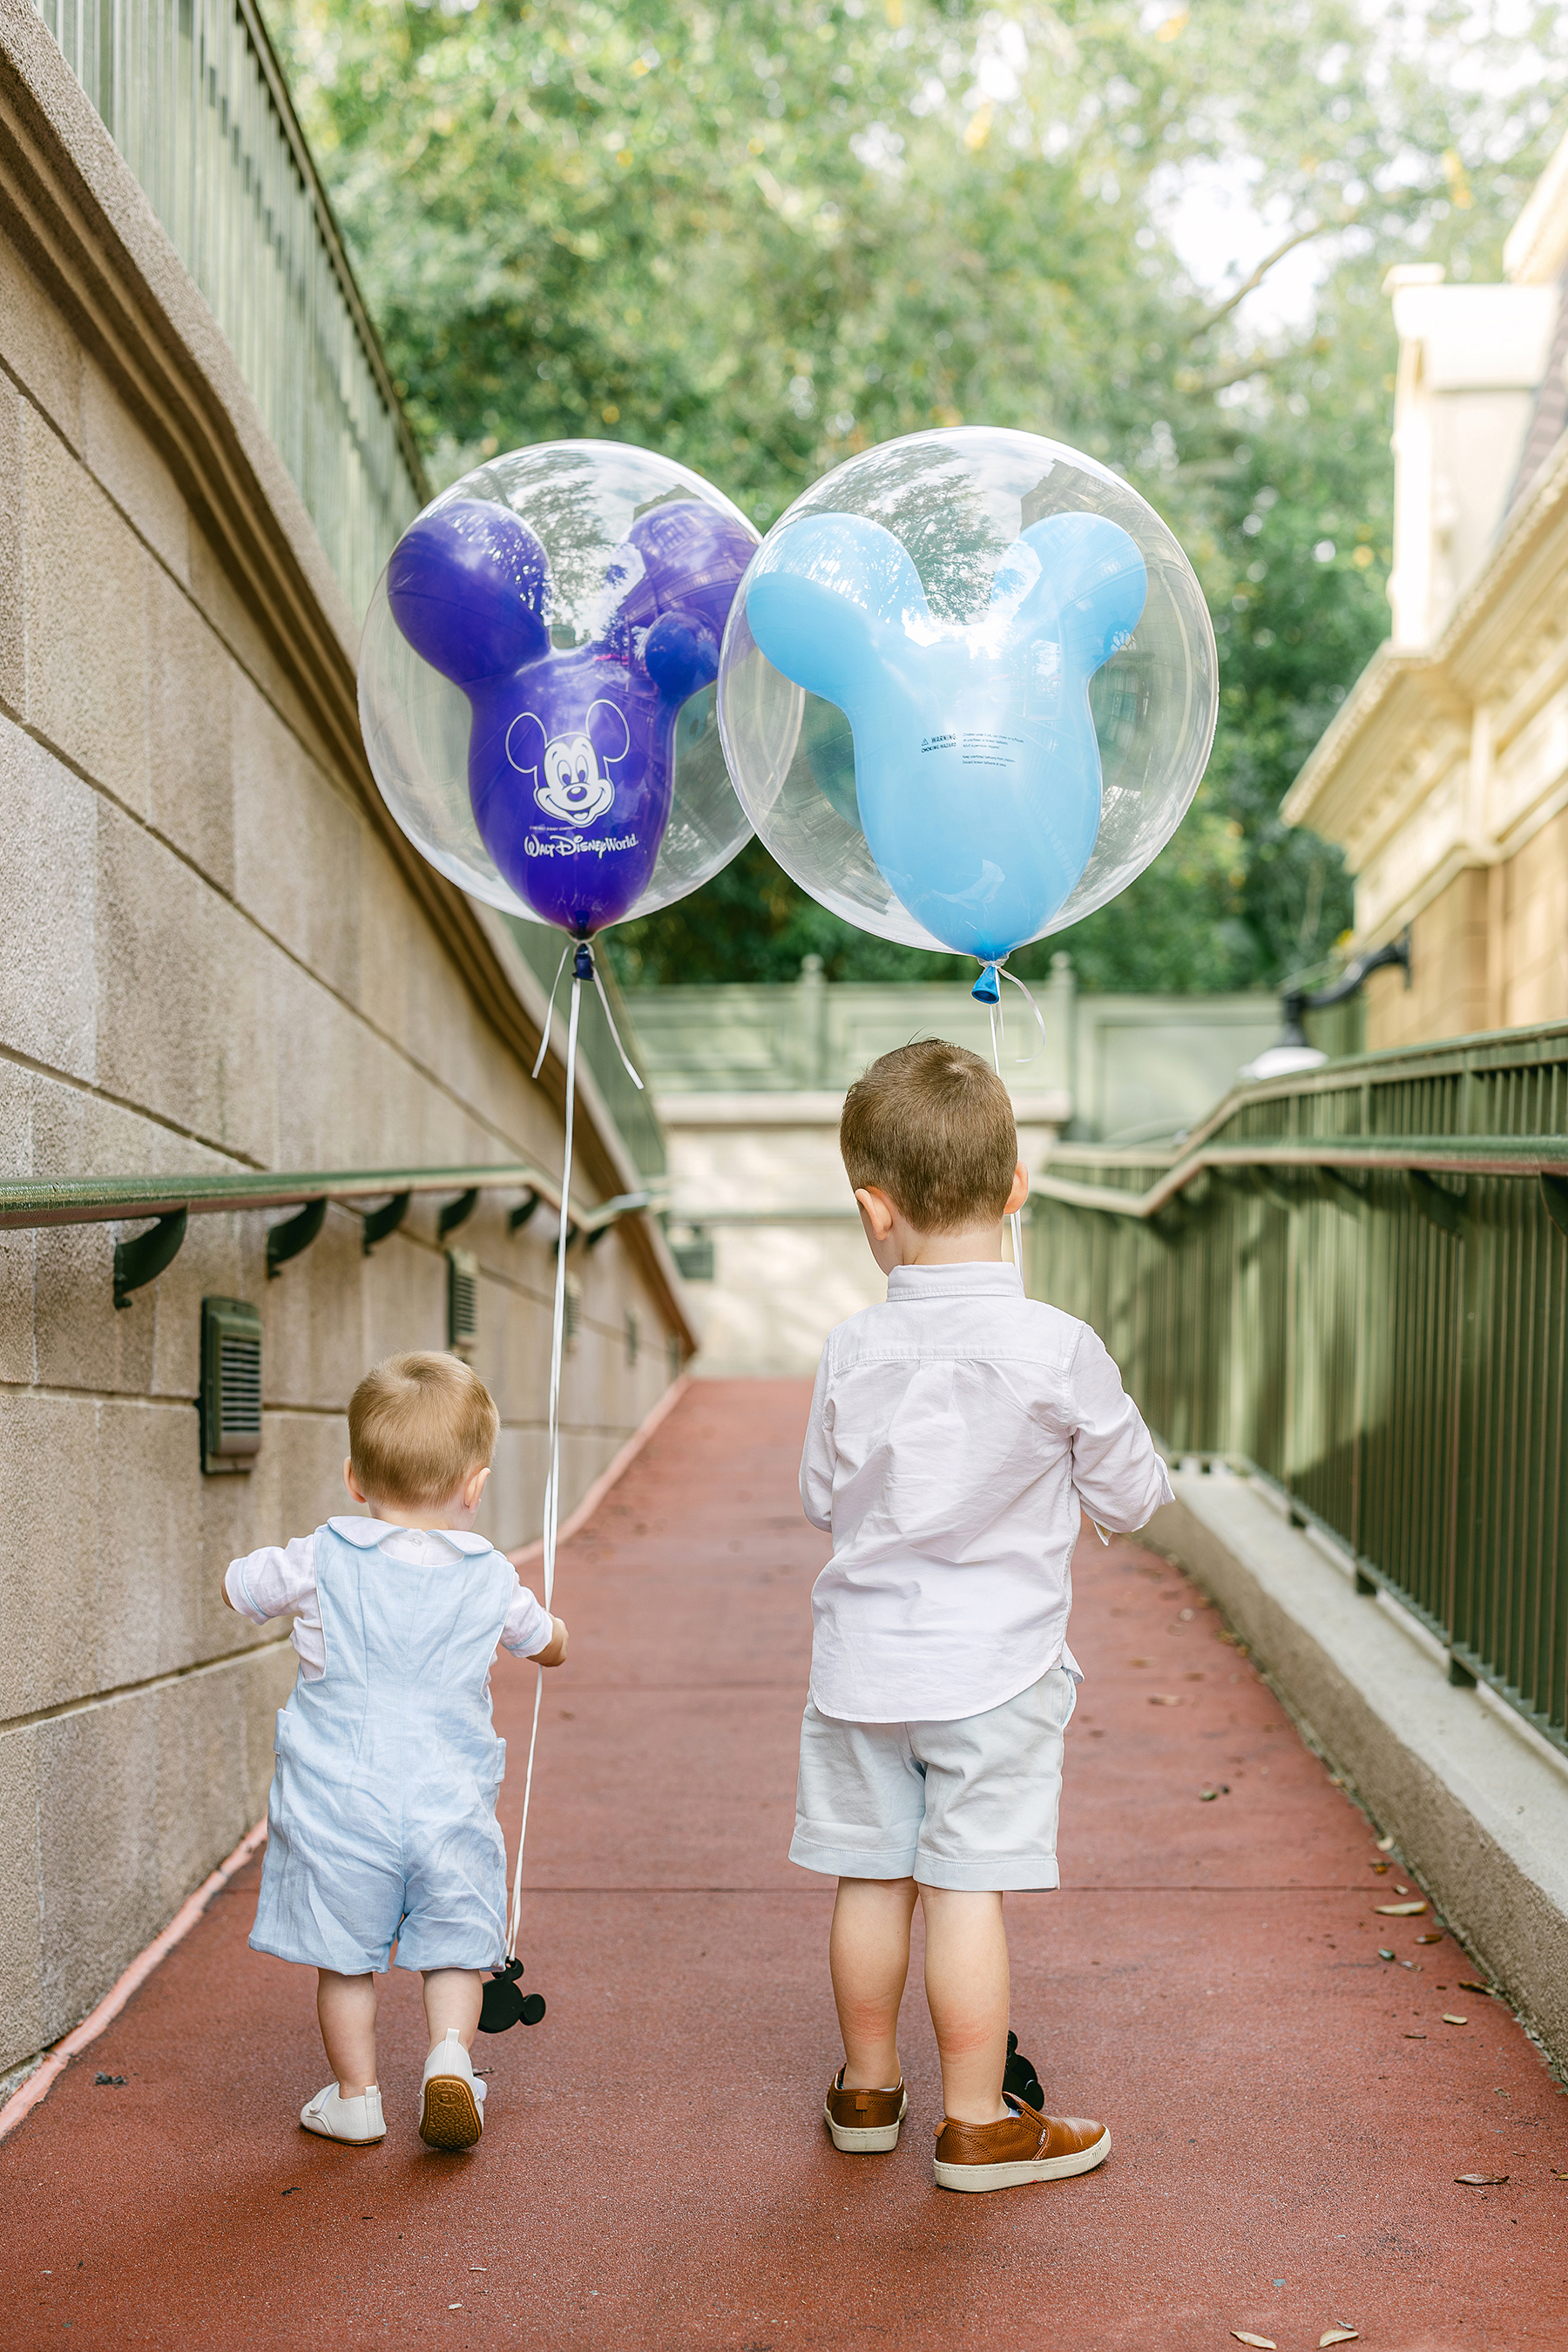 Two little boys walk together down a walkway holding Mickey Balloons.